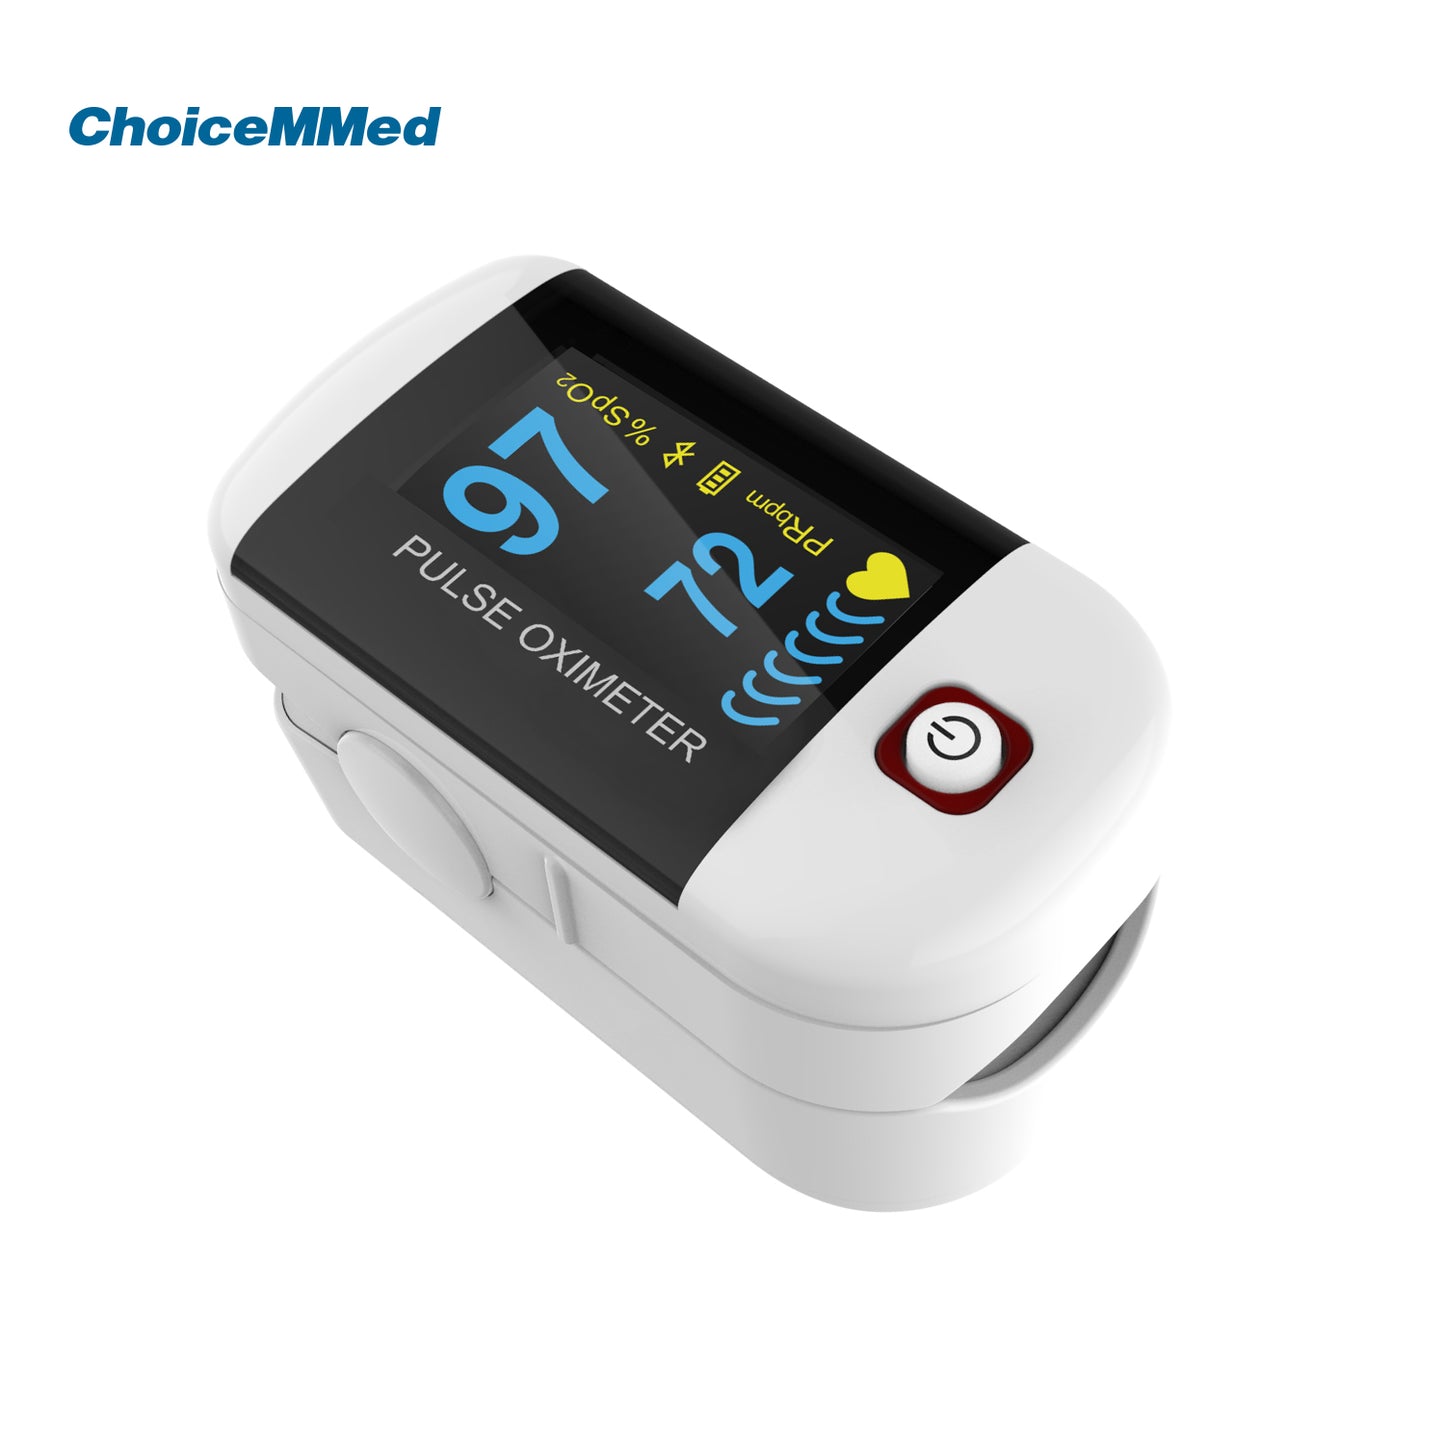 CHOICEMMED MD300C228 Bluetooth Fingertrip Pulse Oximeter – ChoiceMMed